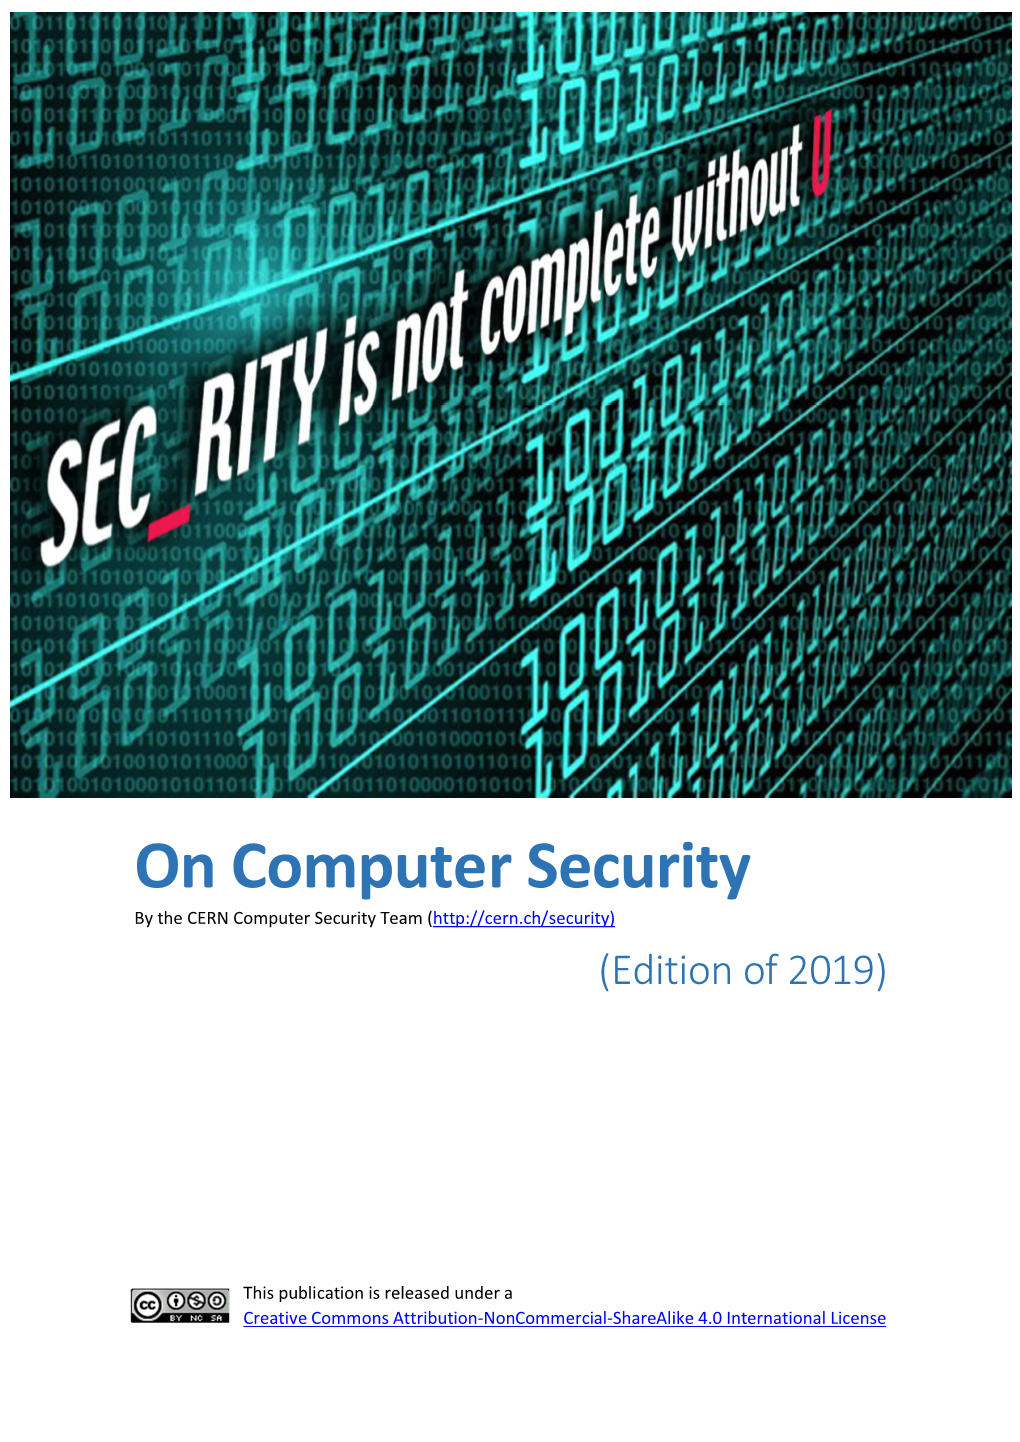 On Computer Security by the CERN Computer Security Team ( (Edition of 2019)